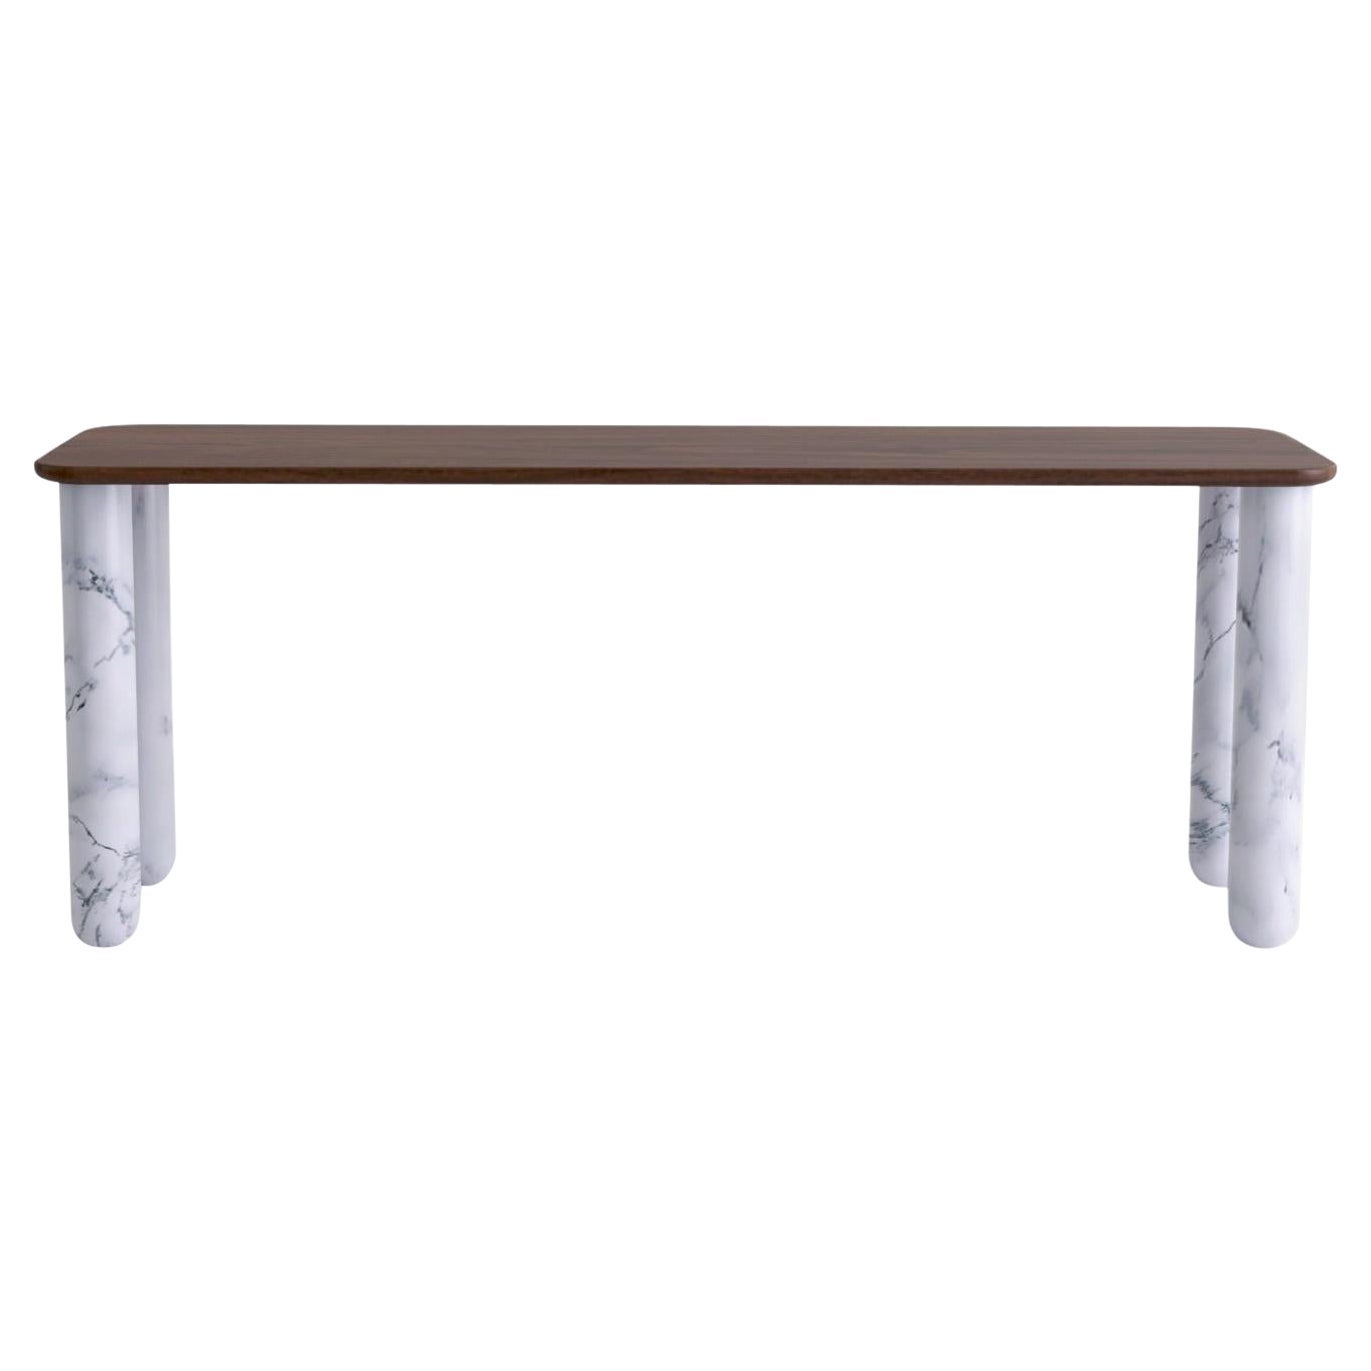 Large Walnut and White Marble "Sunday" Dining Table, Jean-Baptiste Souletie For Sale